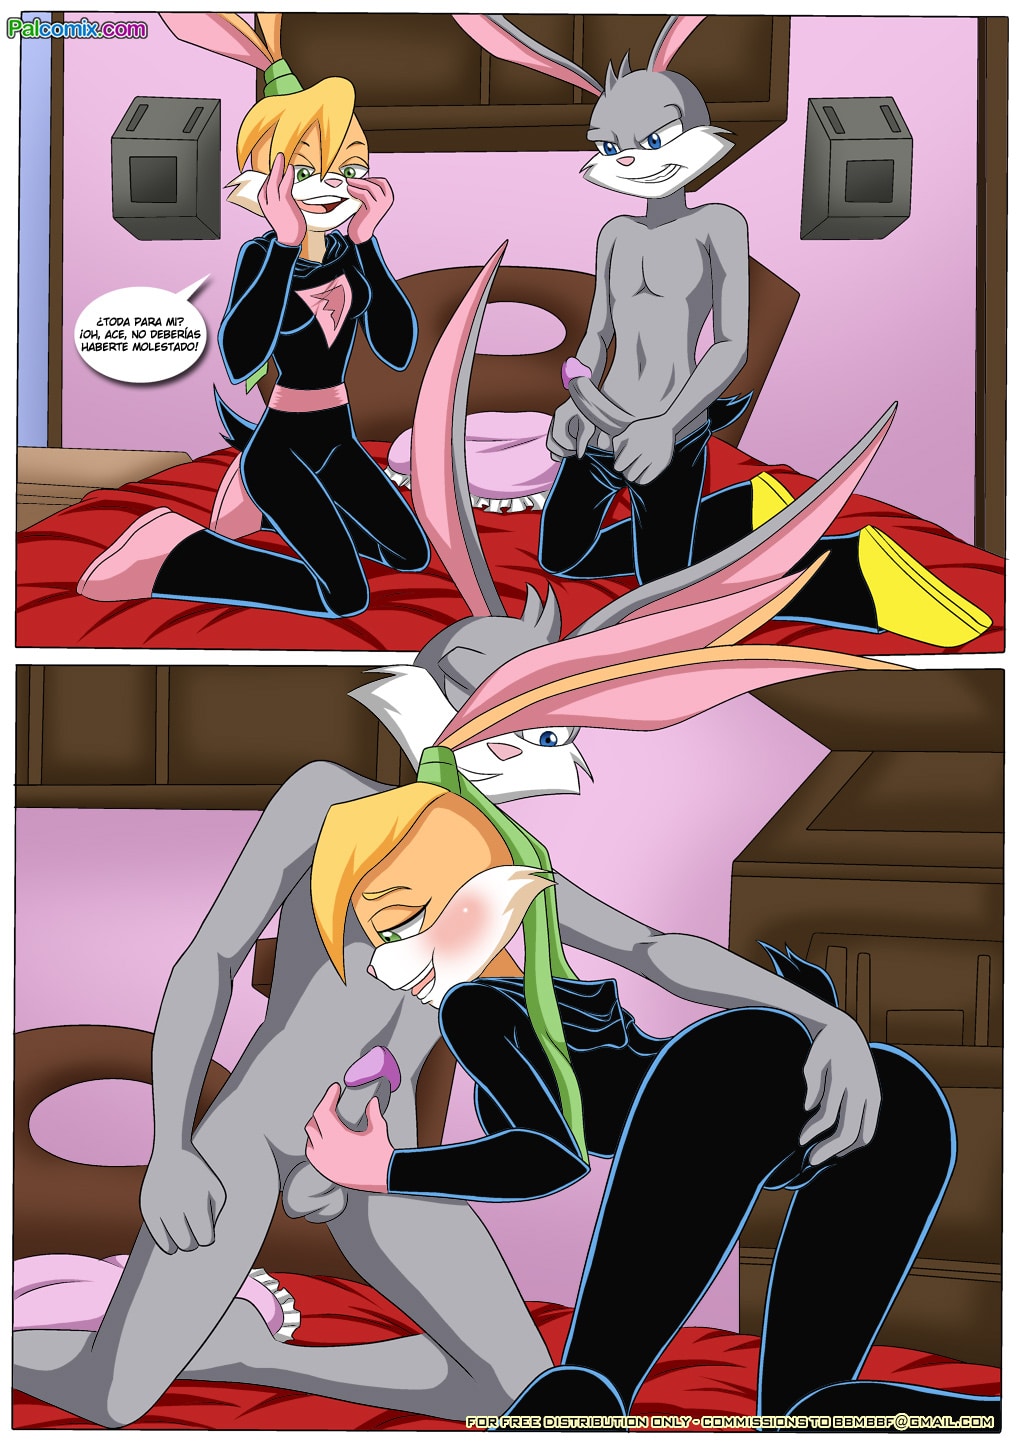 [Palcomix] Time Crossed Bunnies #2 - 3